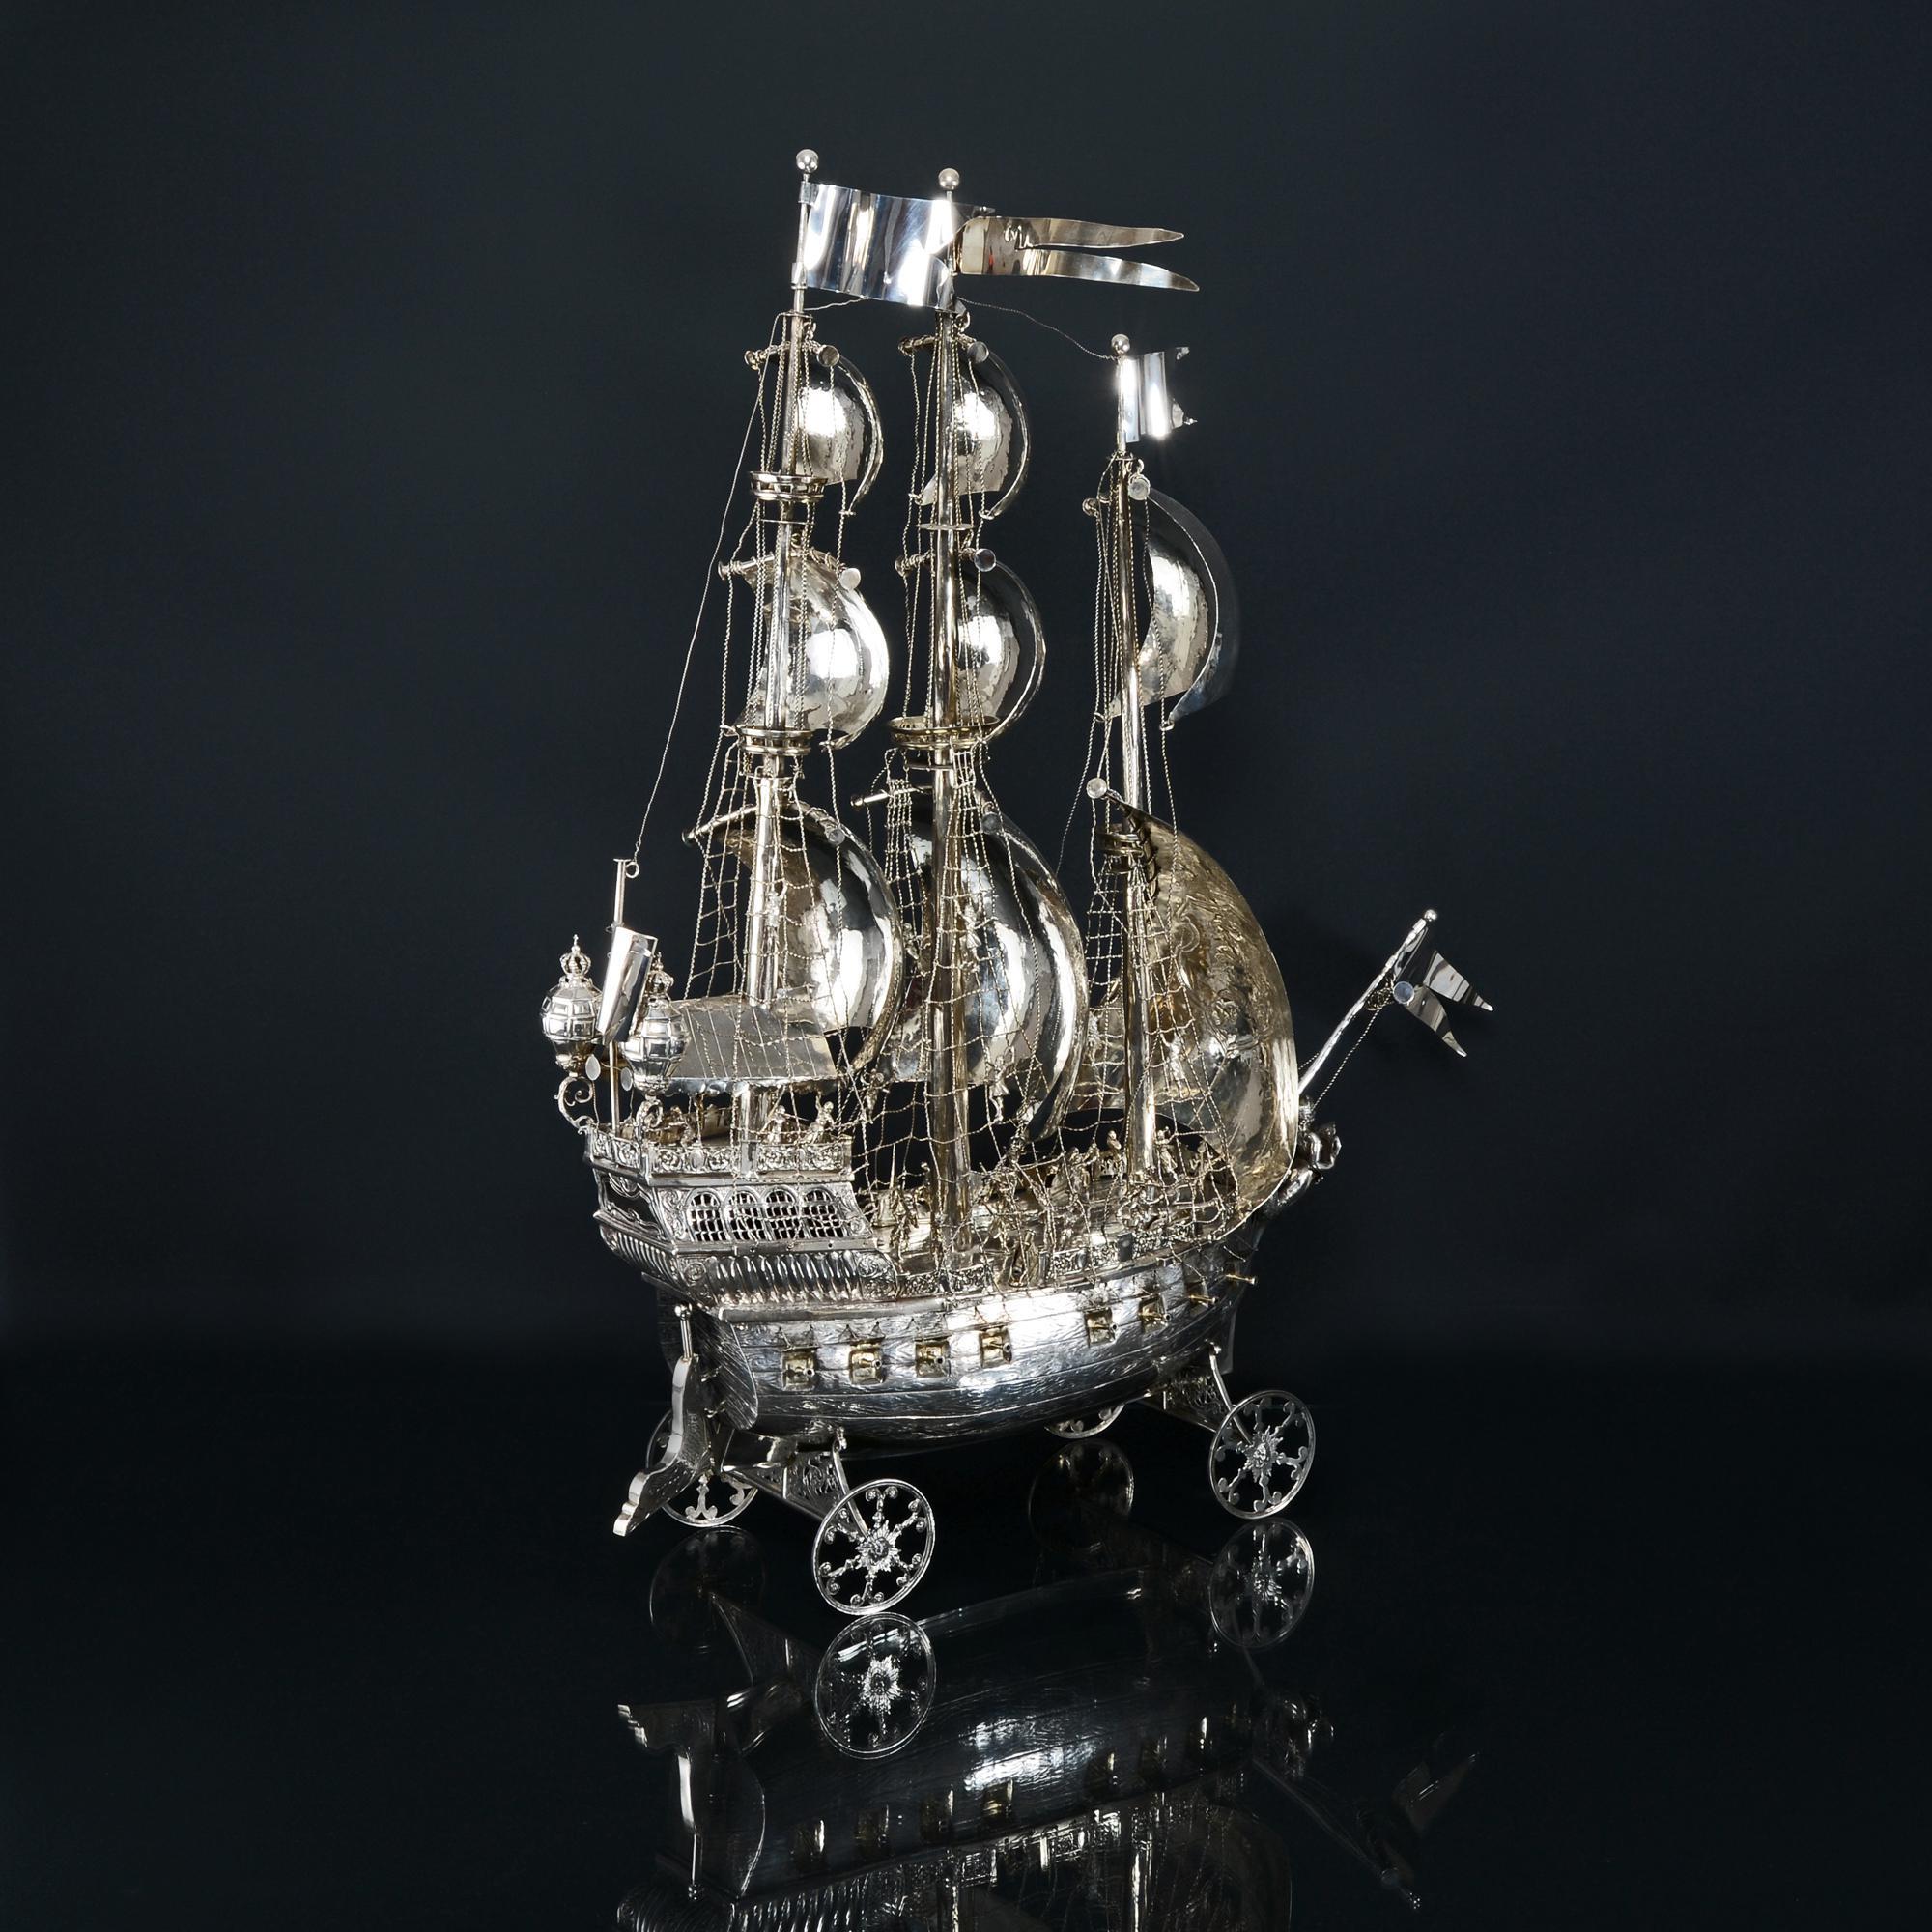 This hugely impressive sterling silver model ship, also known as a nef, was made in Germany by Berthold Müller and bears import hallmarks for Chester 1909.

Based on a stylised 16th century galleon, and made in exceptional detail with three fully